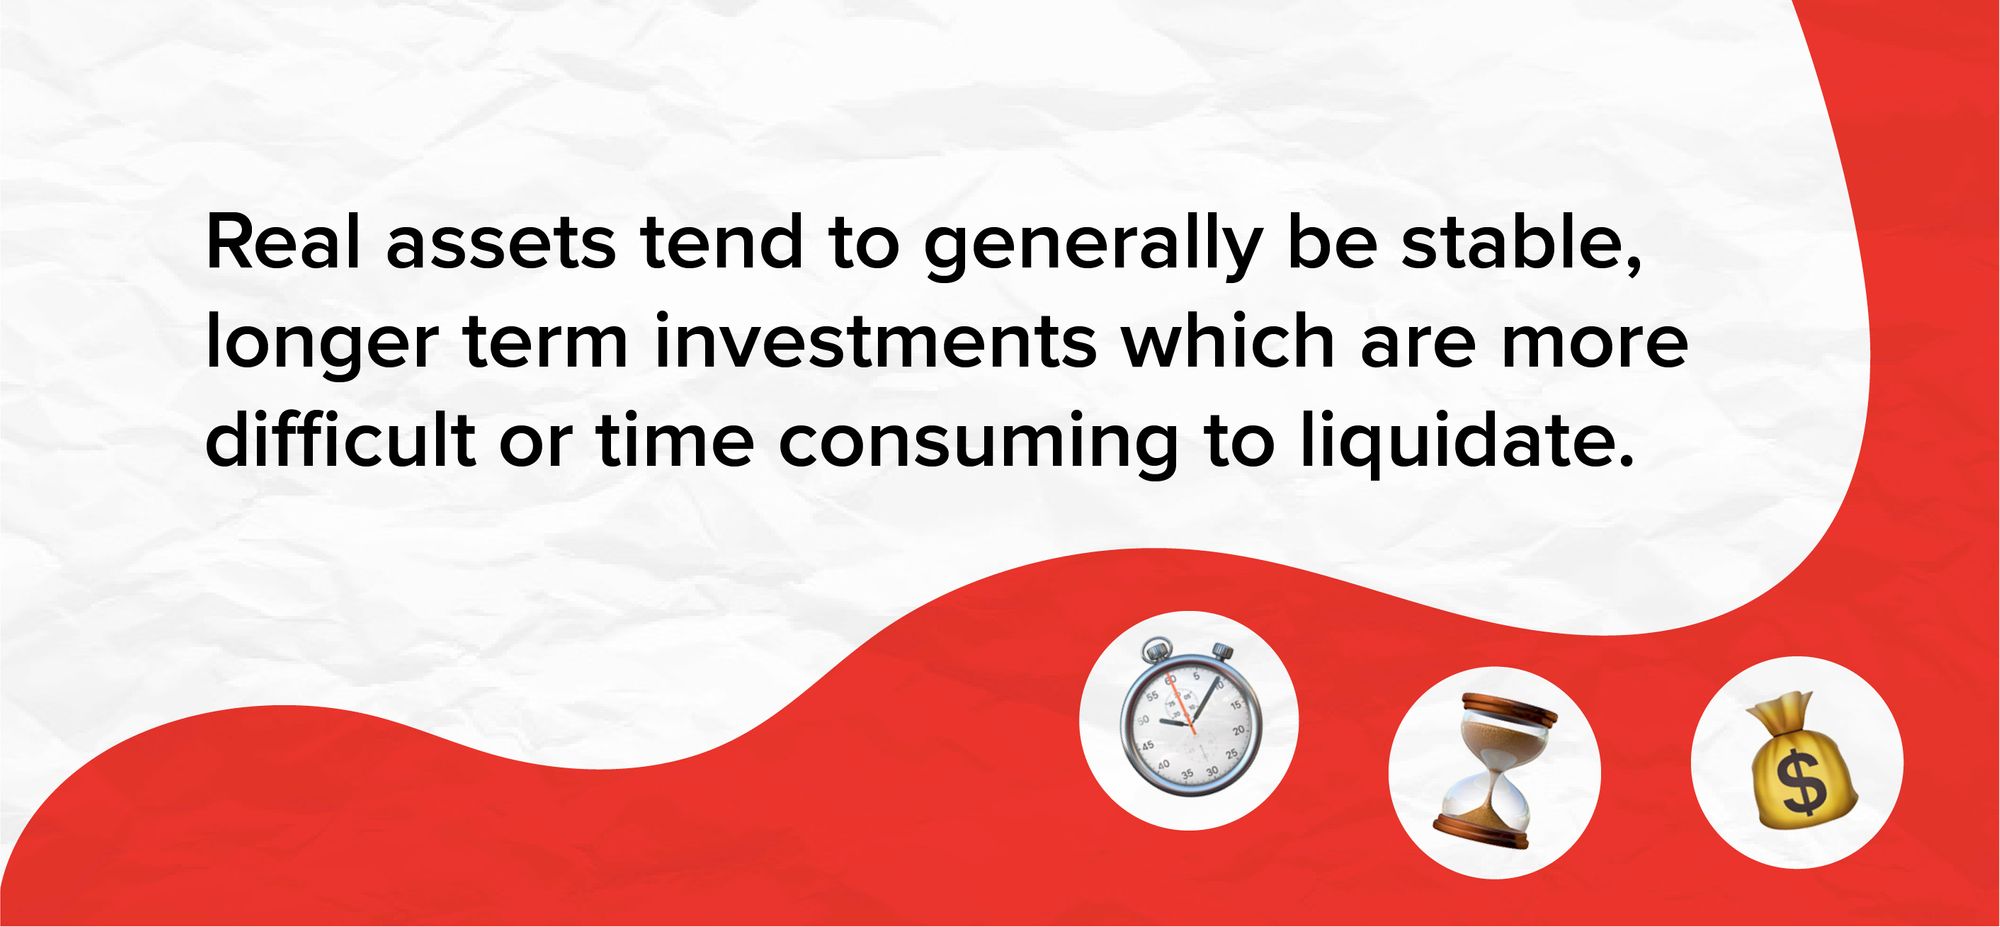 Real assets tend to generally be stable, longer term investments which are more difficult or time consuming to liquidate.